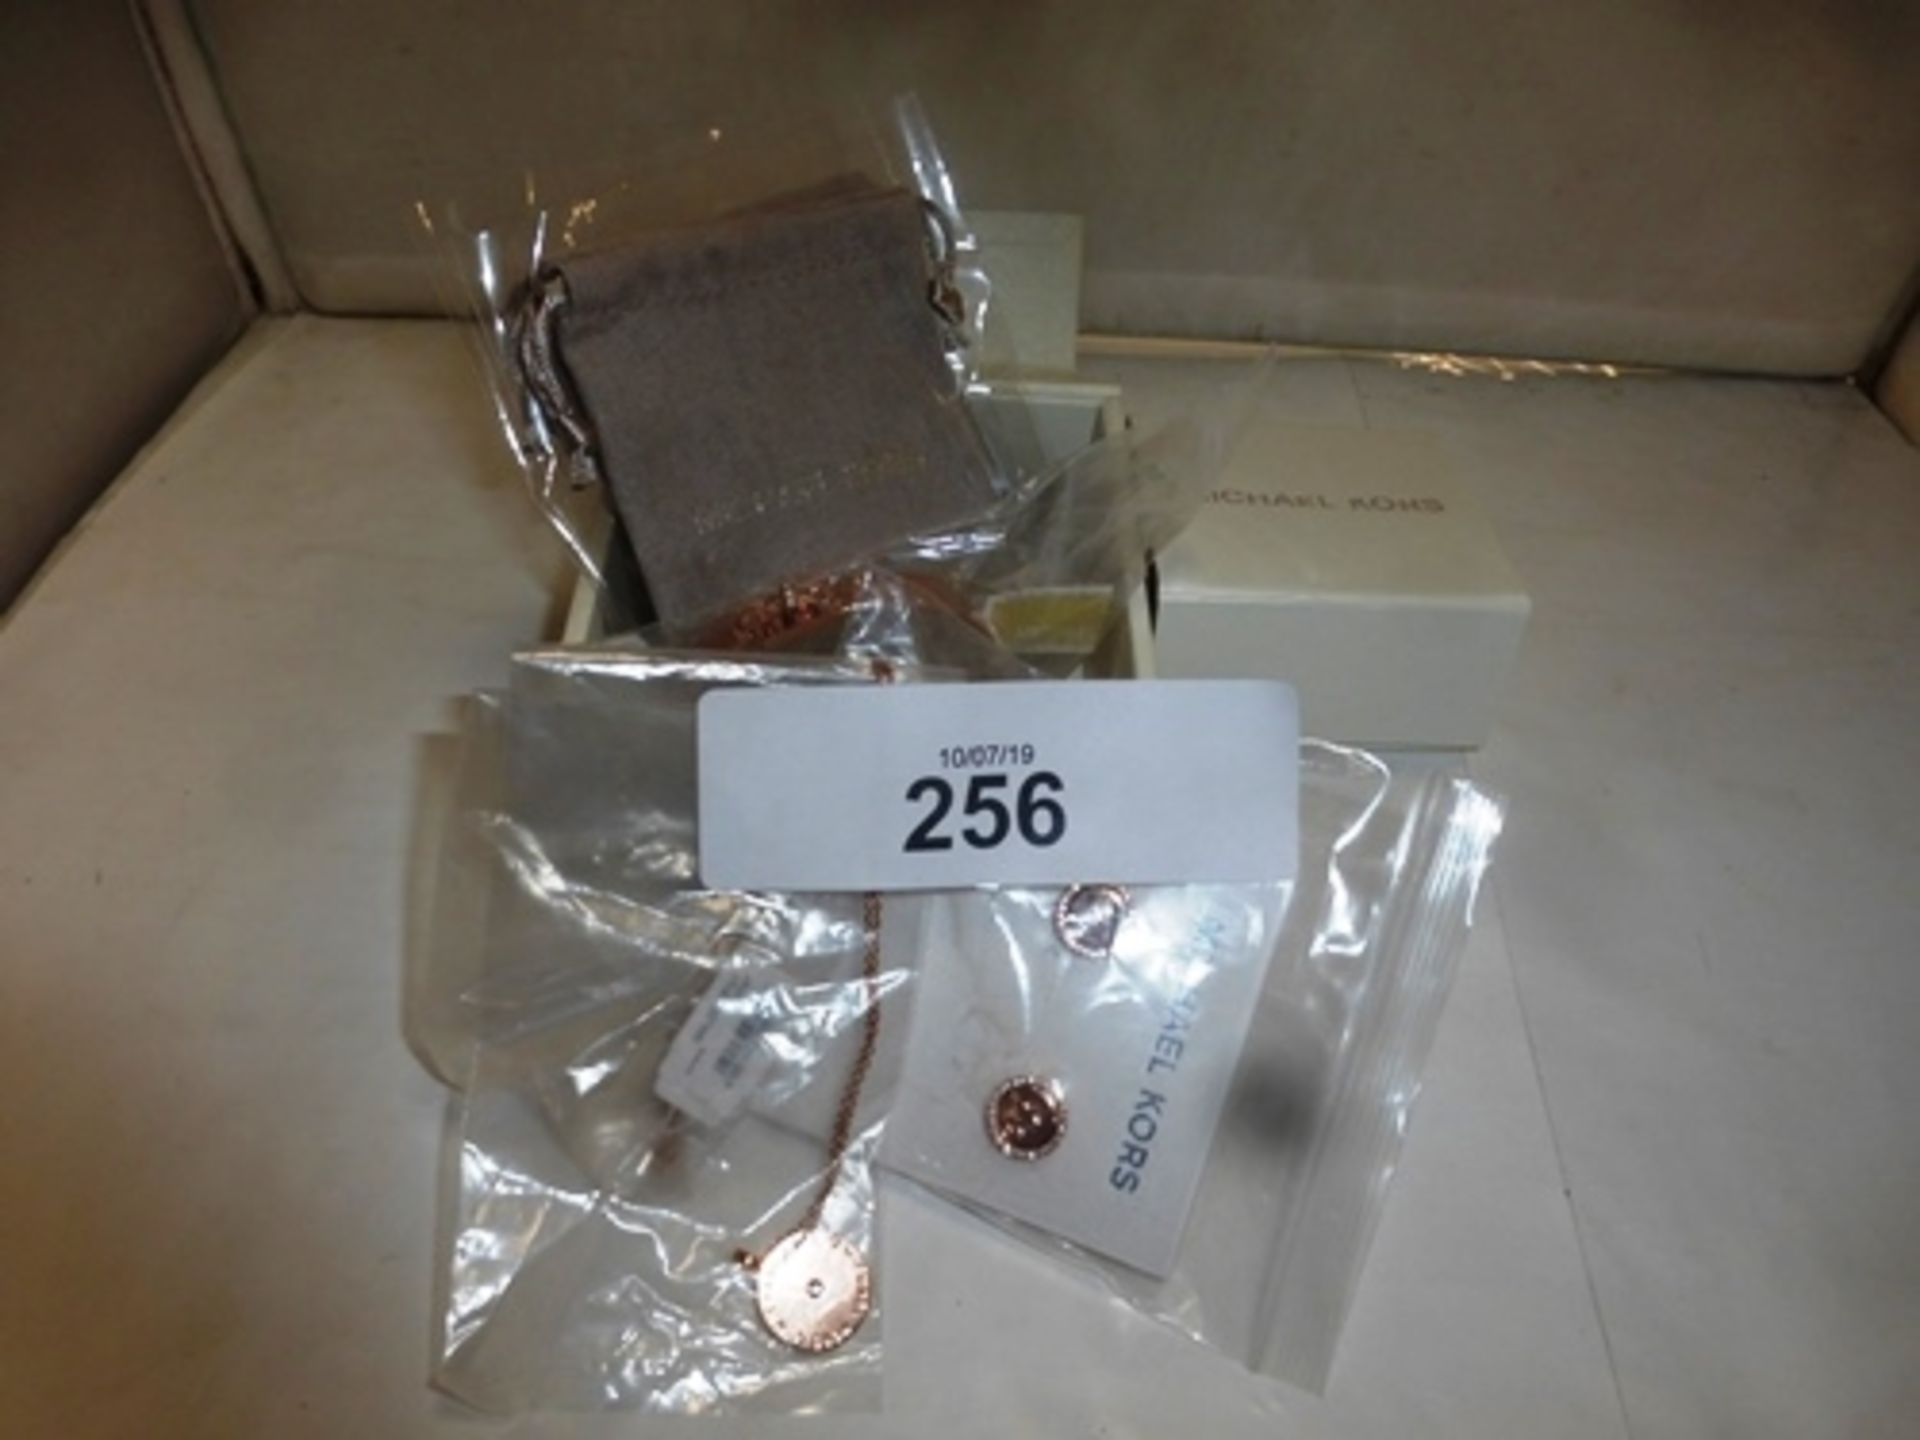 Michael Kors jewellery in rose gold finish consisting of 1 x MK earrings, 1 x bracelet, 1 x necklace